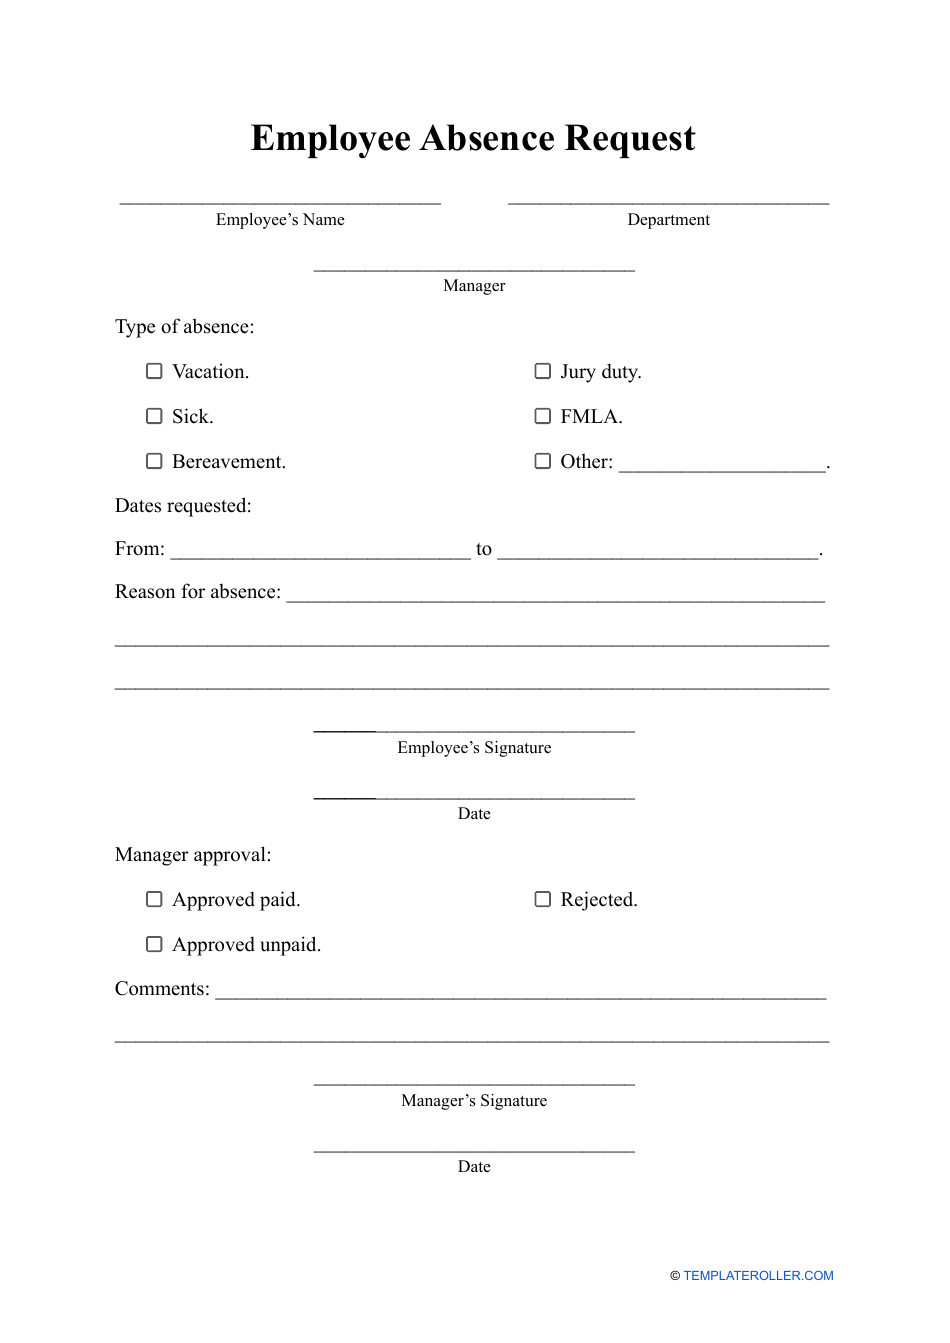 Employee Absence Request Form, Page 1